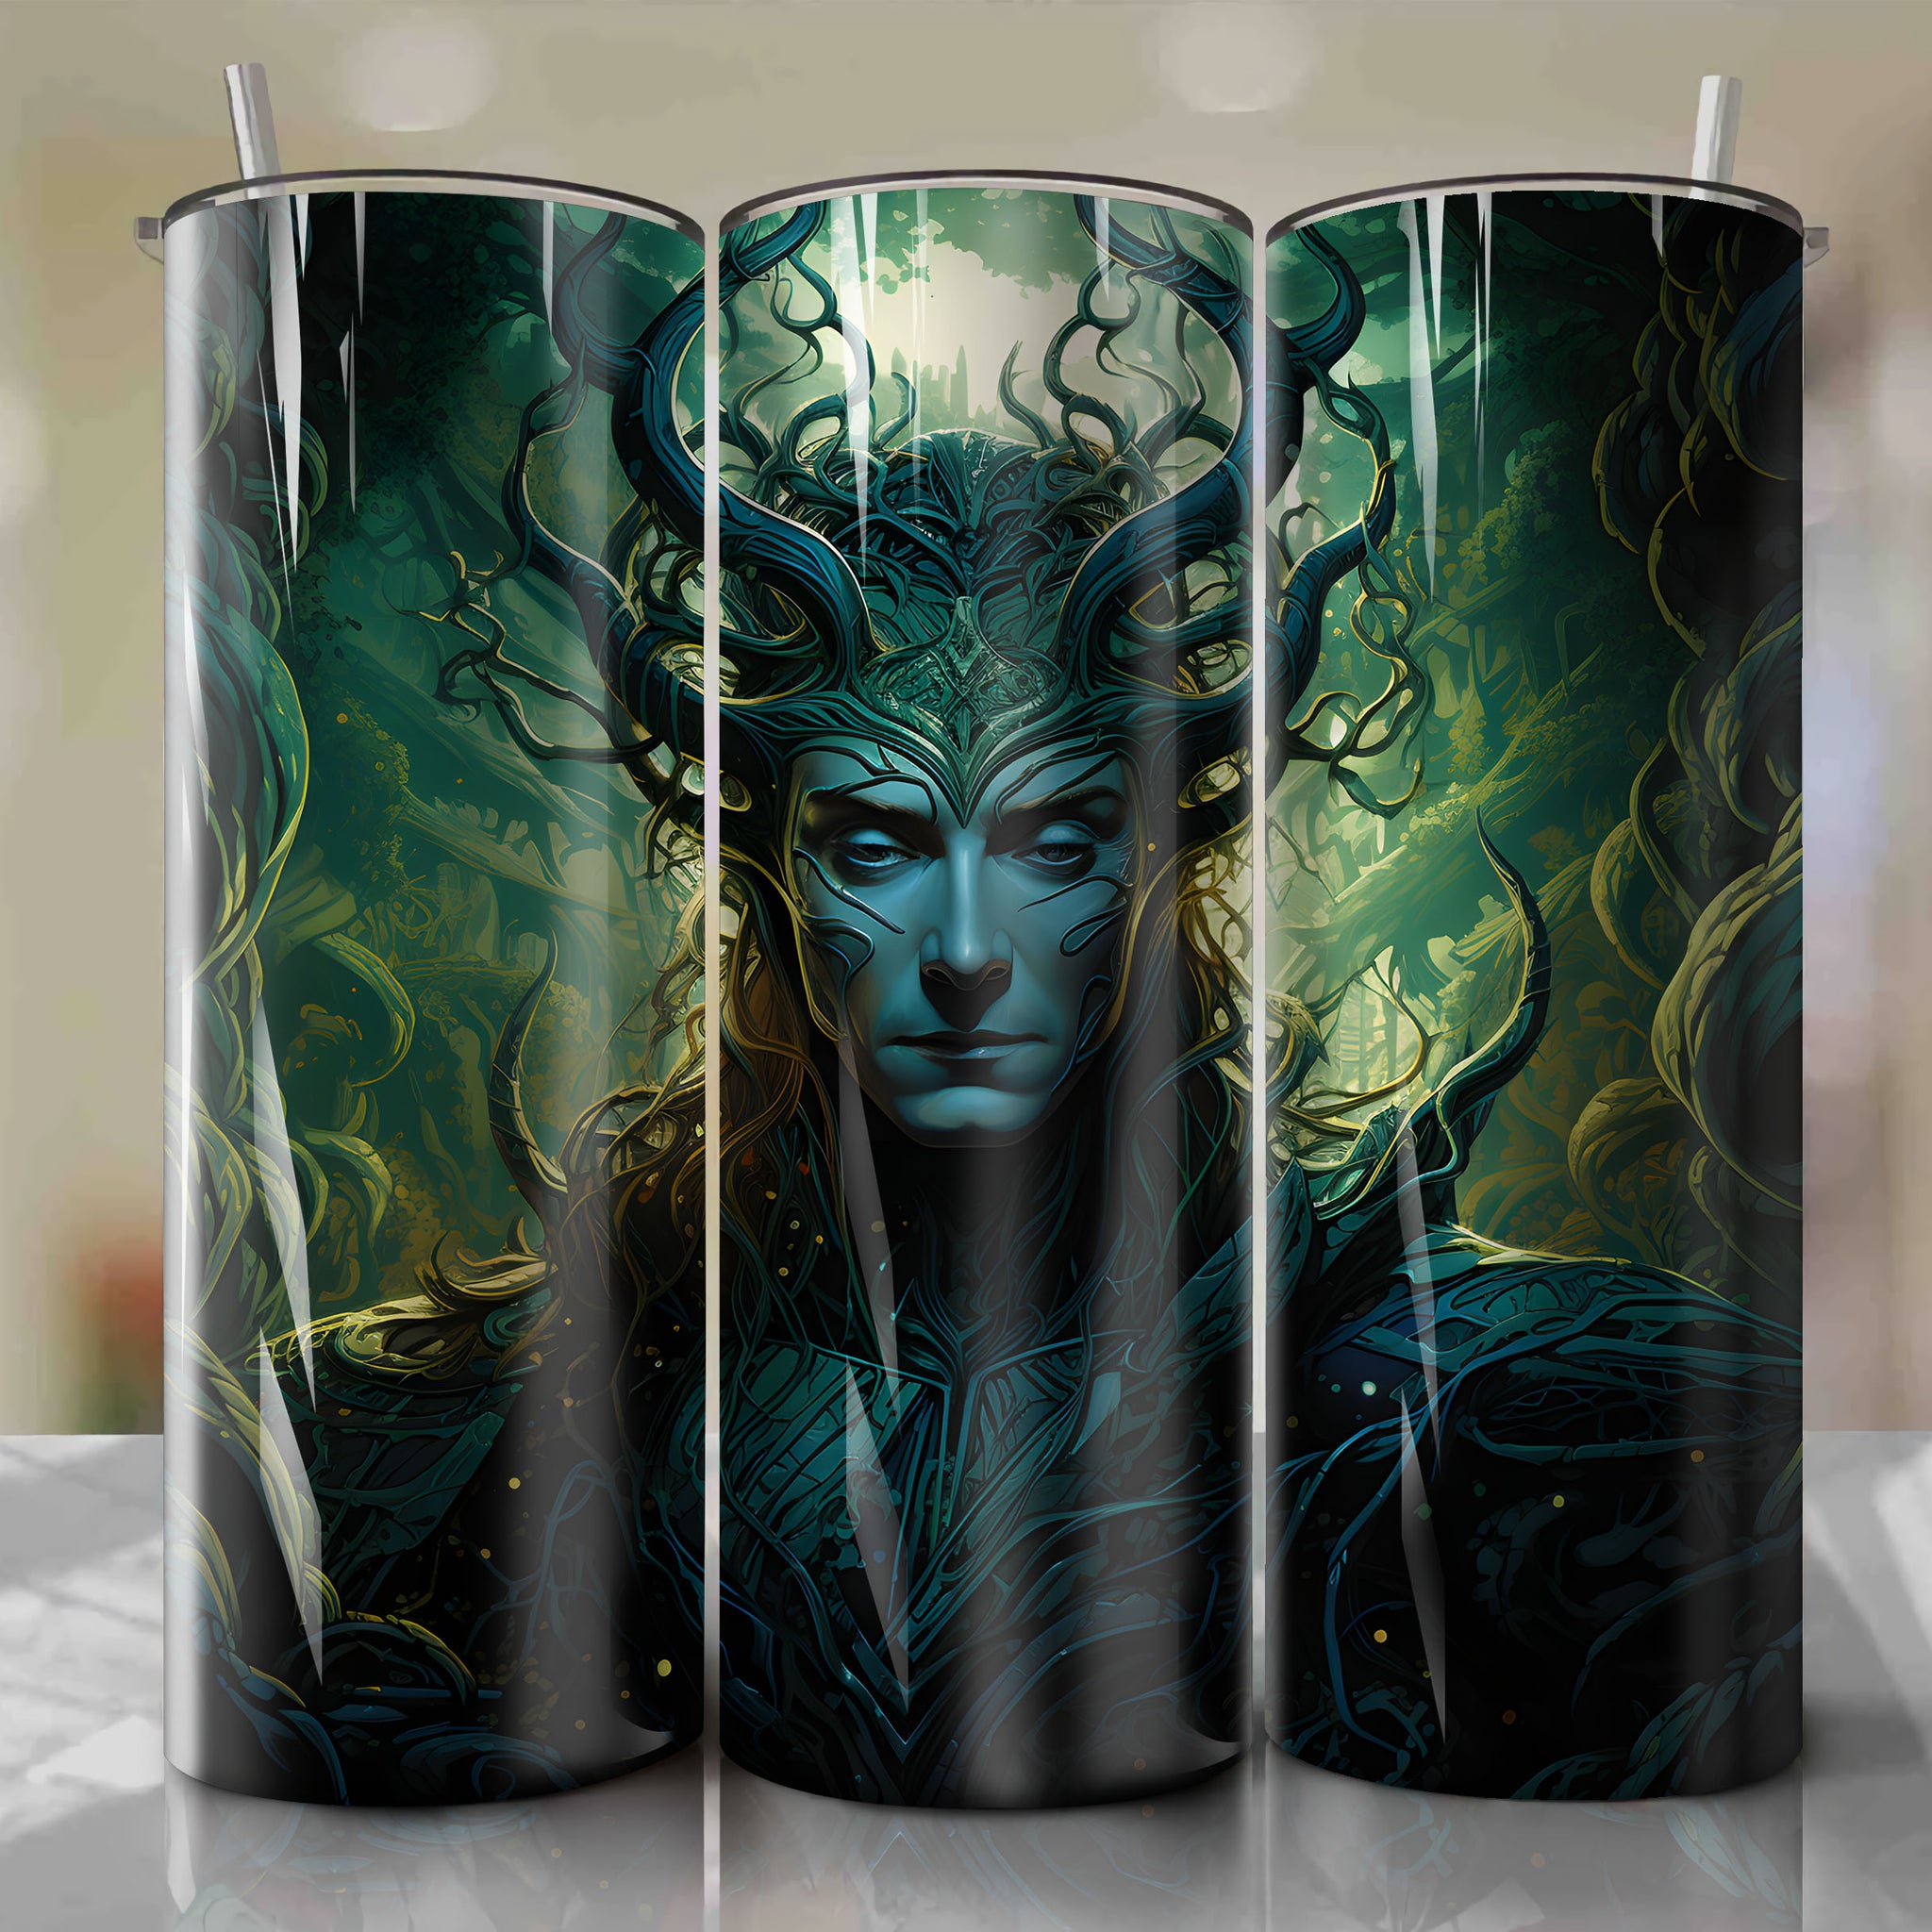 Loki 20 Oz Tumbler Wrap - Embracing the Mischief and Artistry
